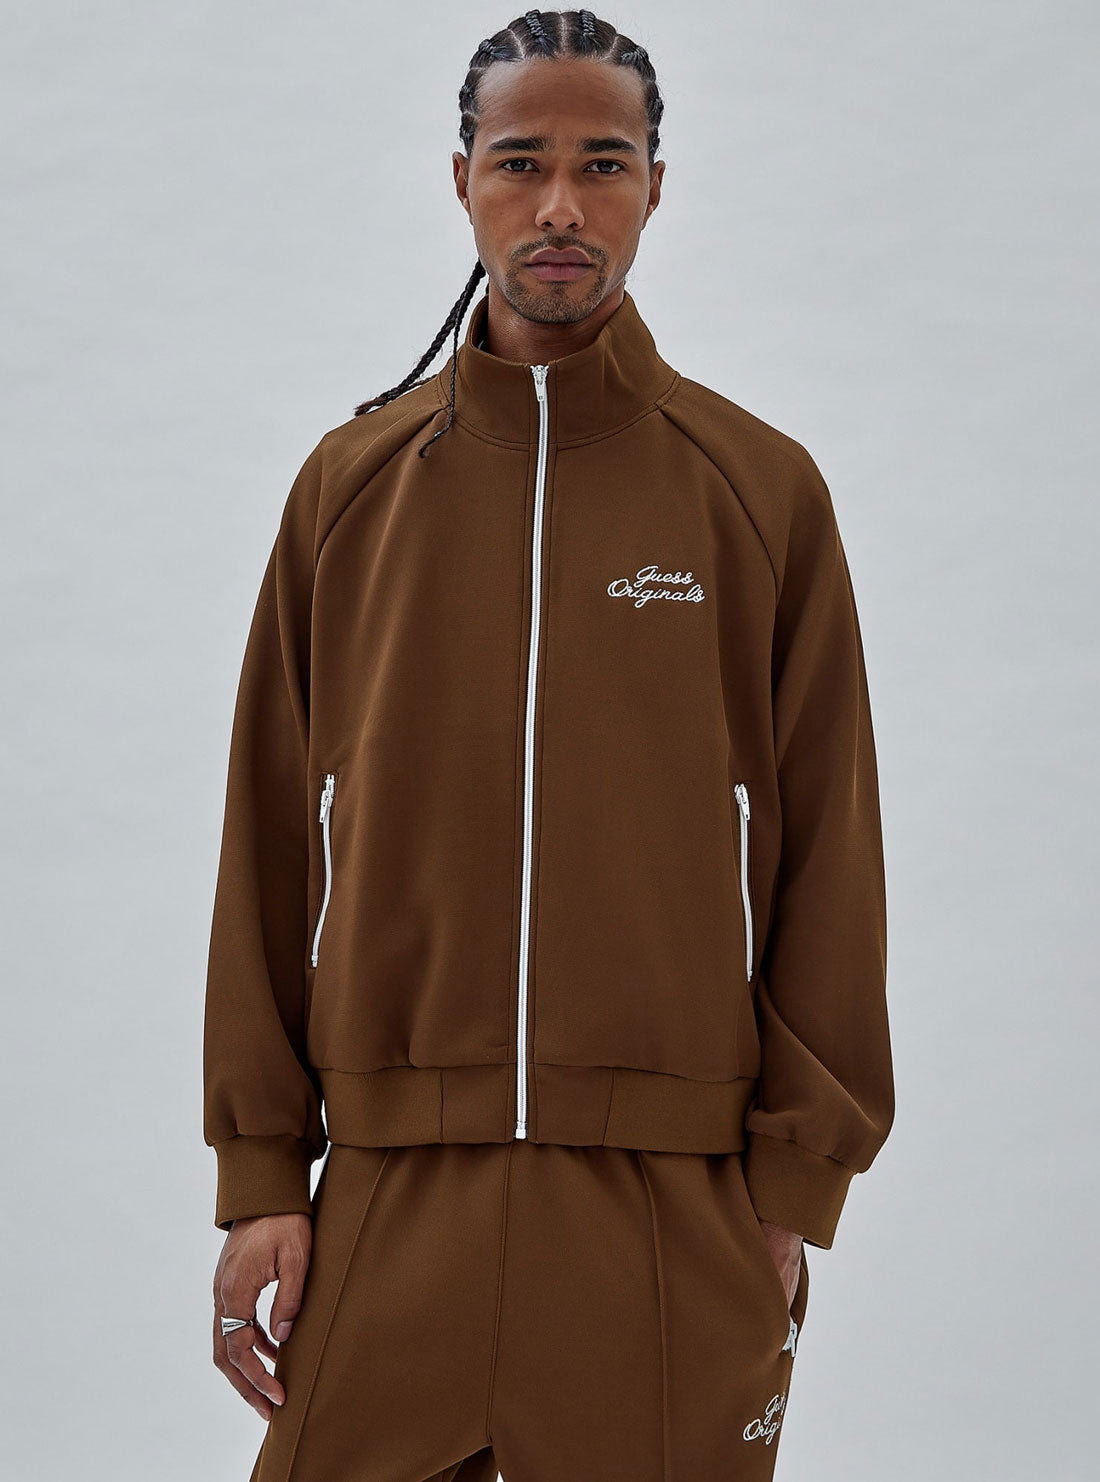 Guess Originals Eco Brown Tricot Track Jacket | GUESS Men's Apparel | front view